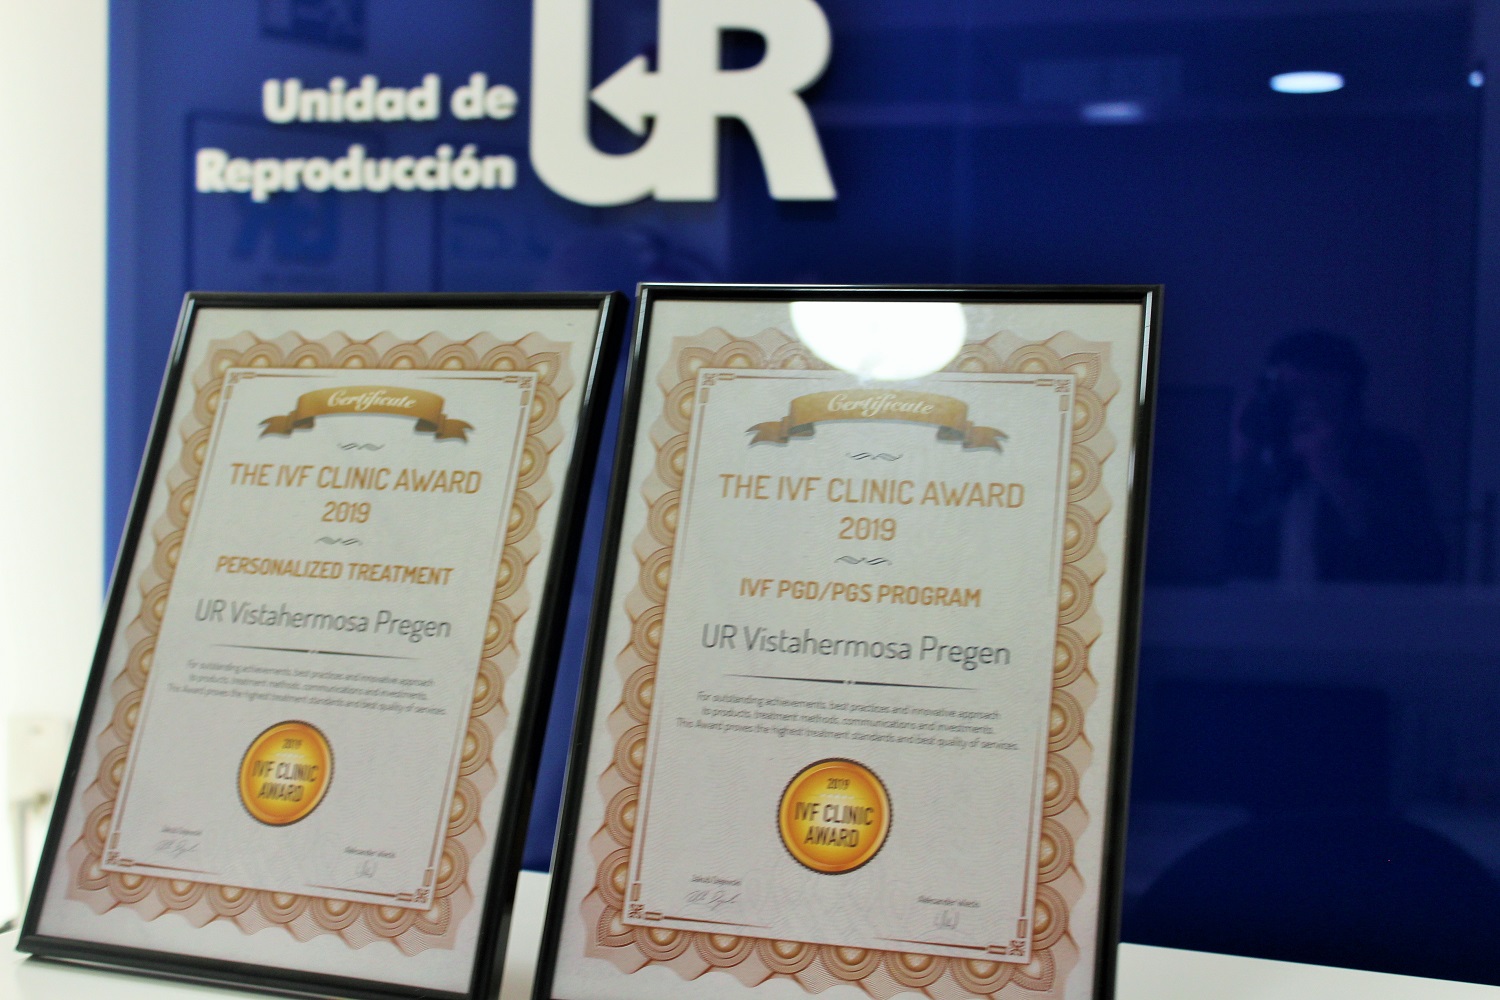 UR Vistahermosa, winner of the Best Personalised Treatment and PGD/PGS Treatments in the IVF AWARDS